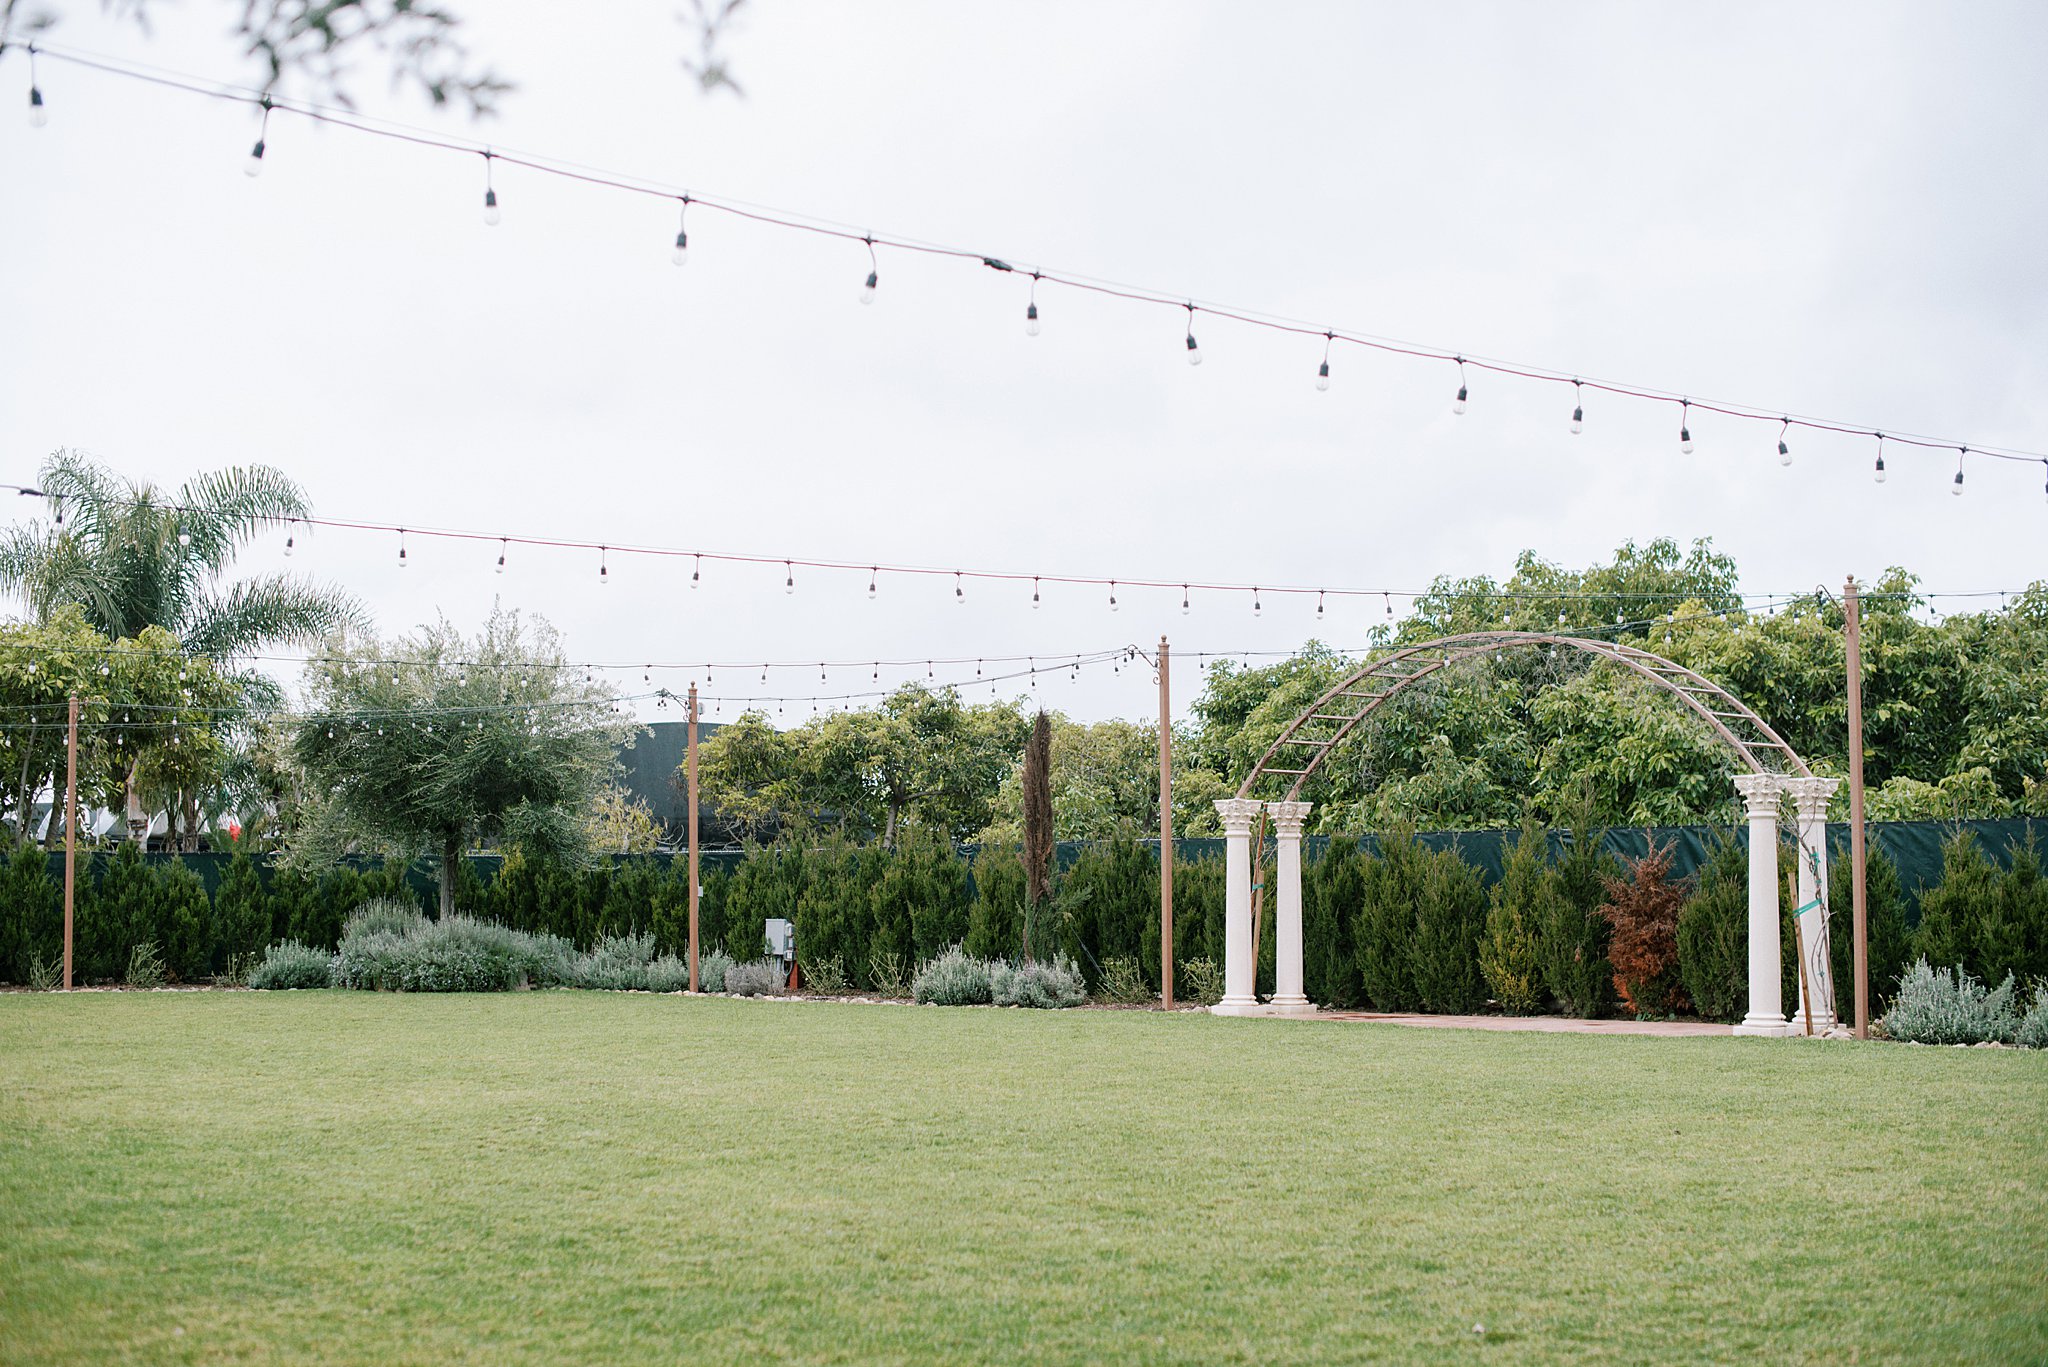 Market lights are strung across the top of the reception lawn at Tuscan Rose Ranch